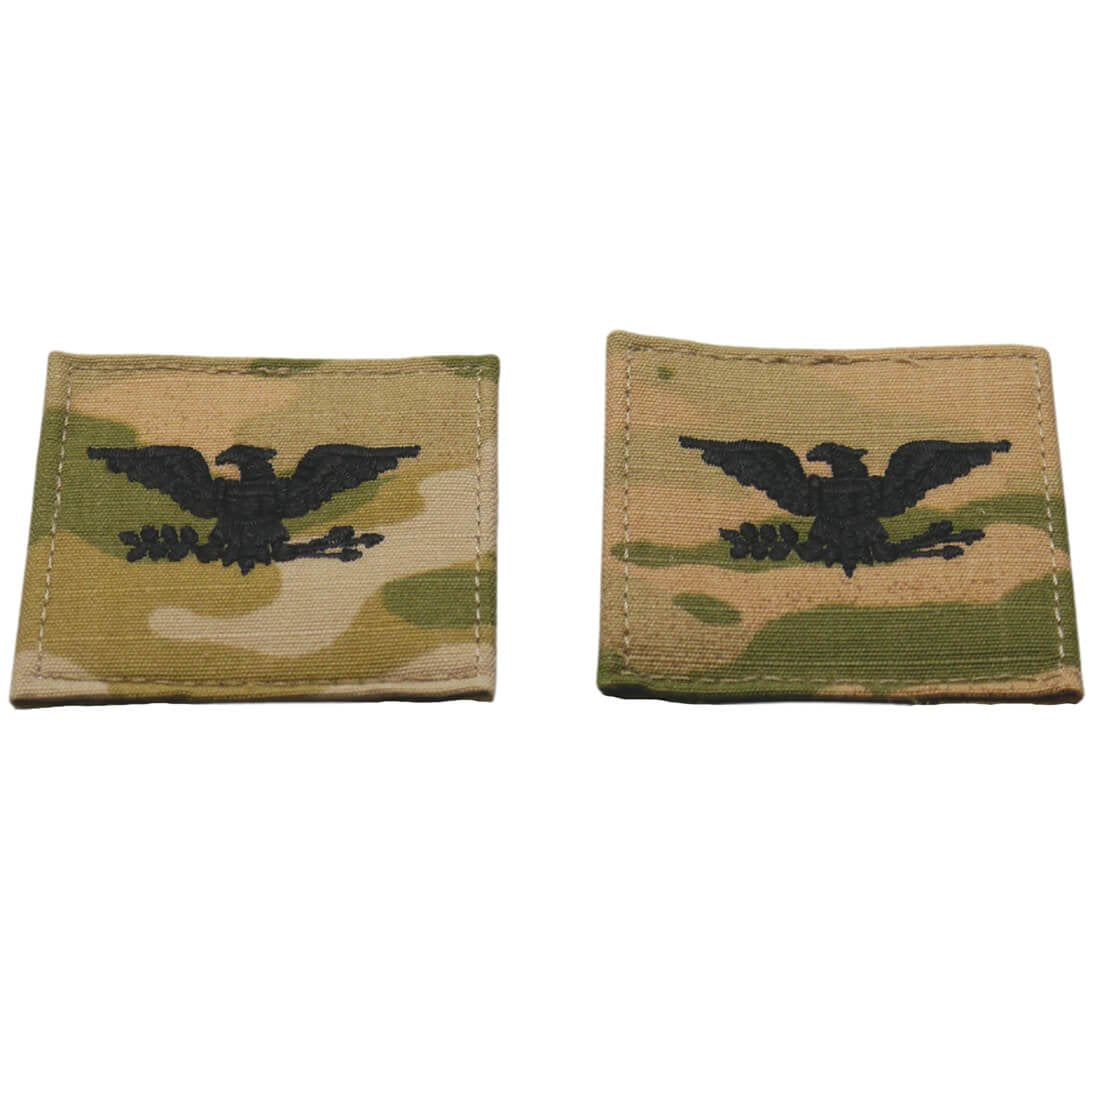 COL Colonel Army Rank OCP Patch Set of 2 3 Color OCP